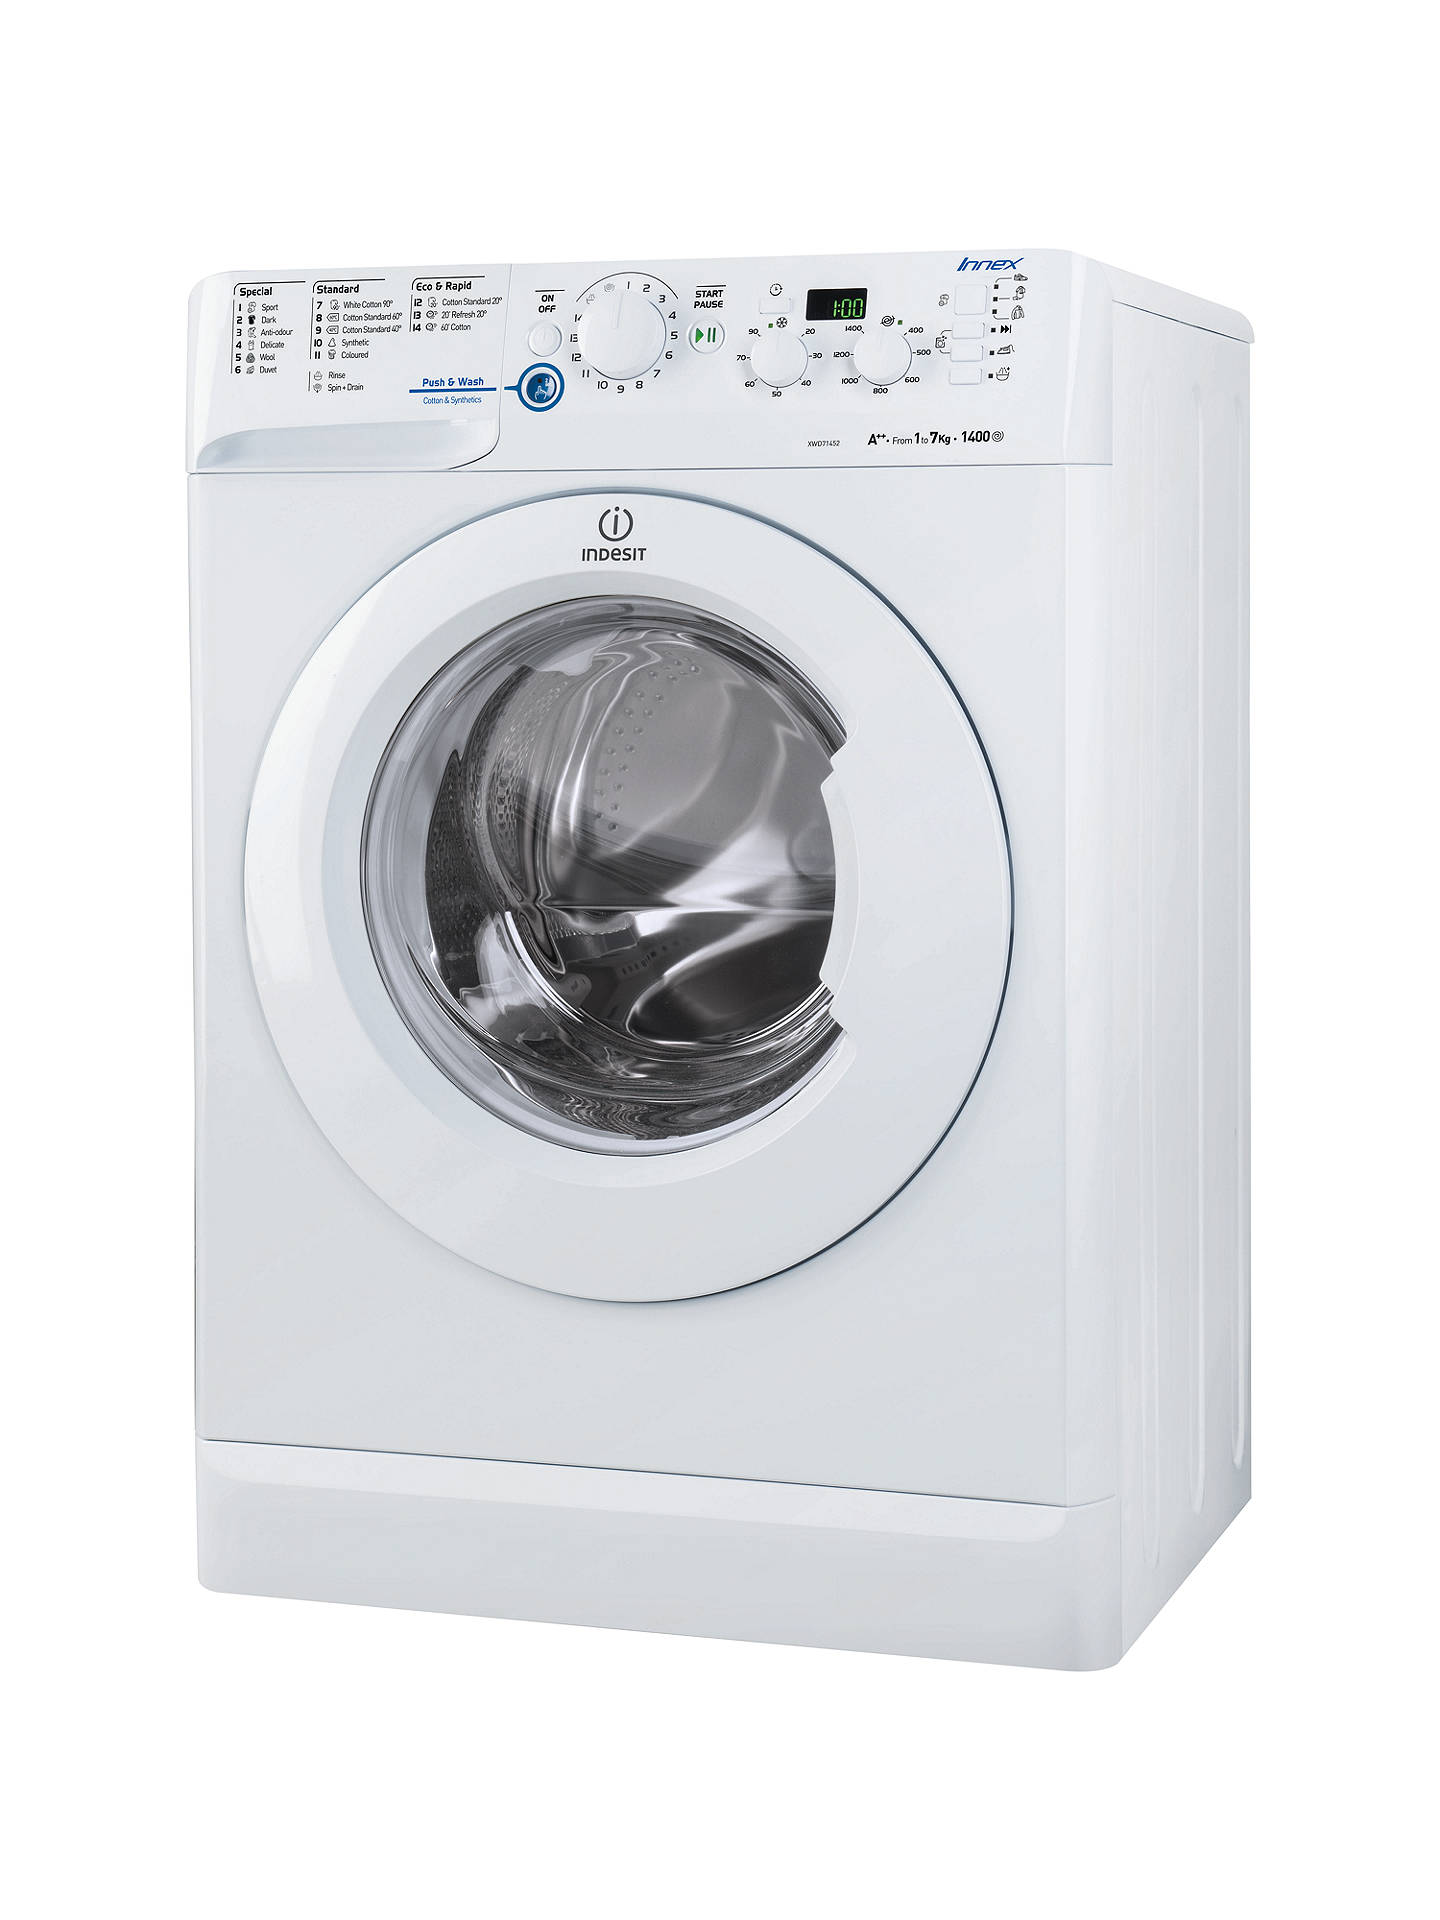 Indesit XWD71452W Freestanding Washing Machine, 7kg Load, A++ Energy Rating, 1400rpm Spin, White ...